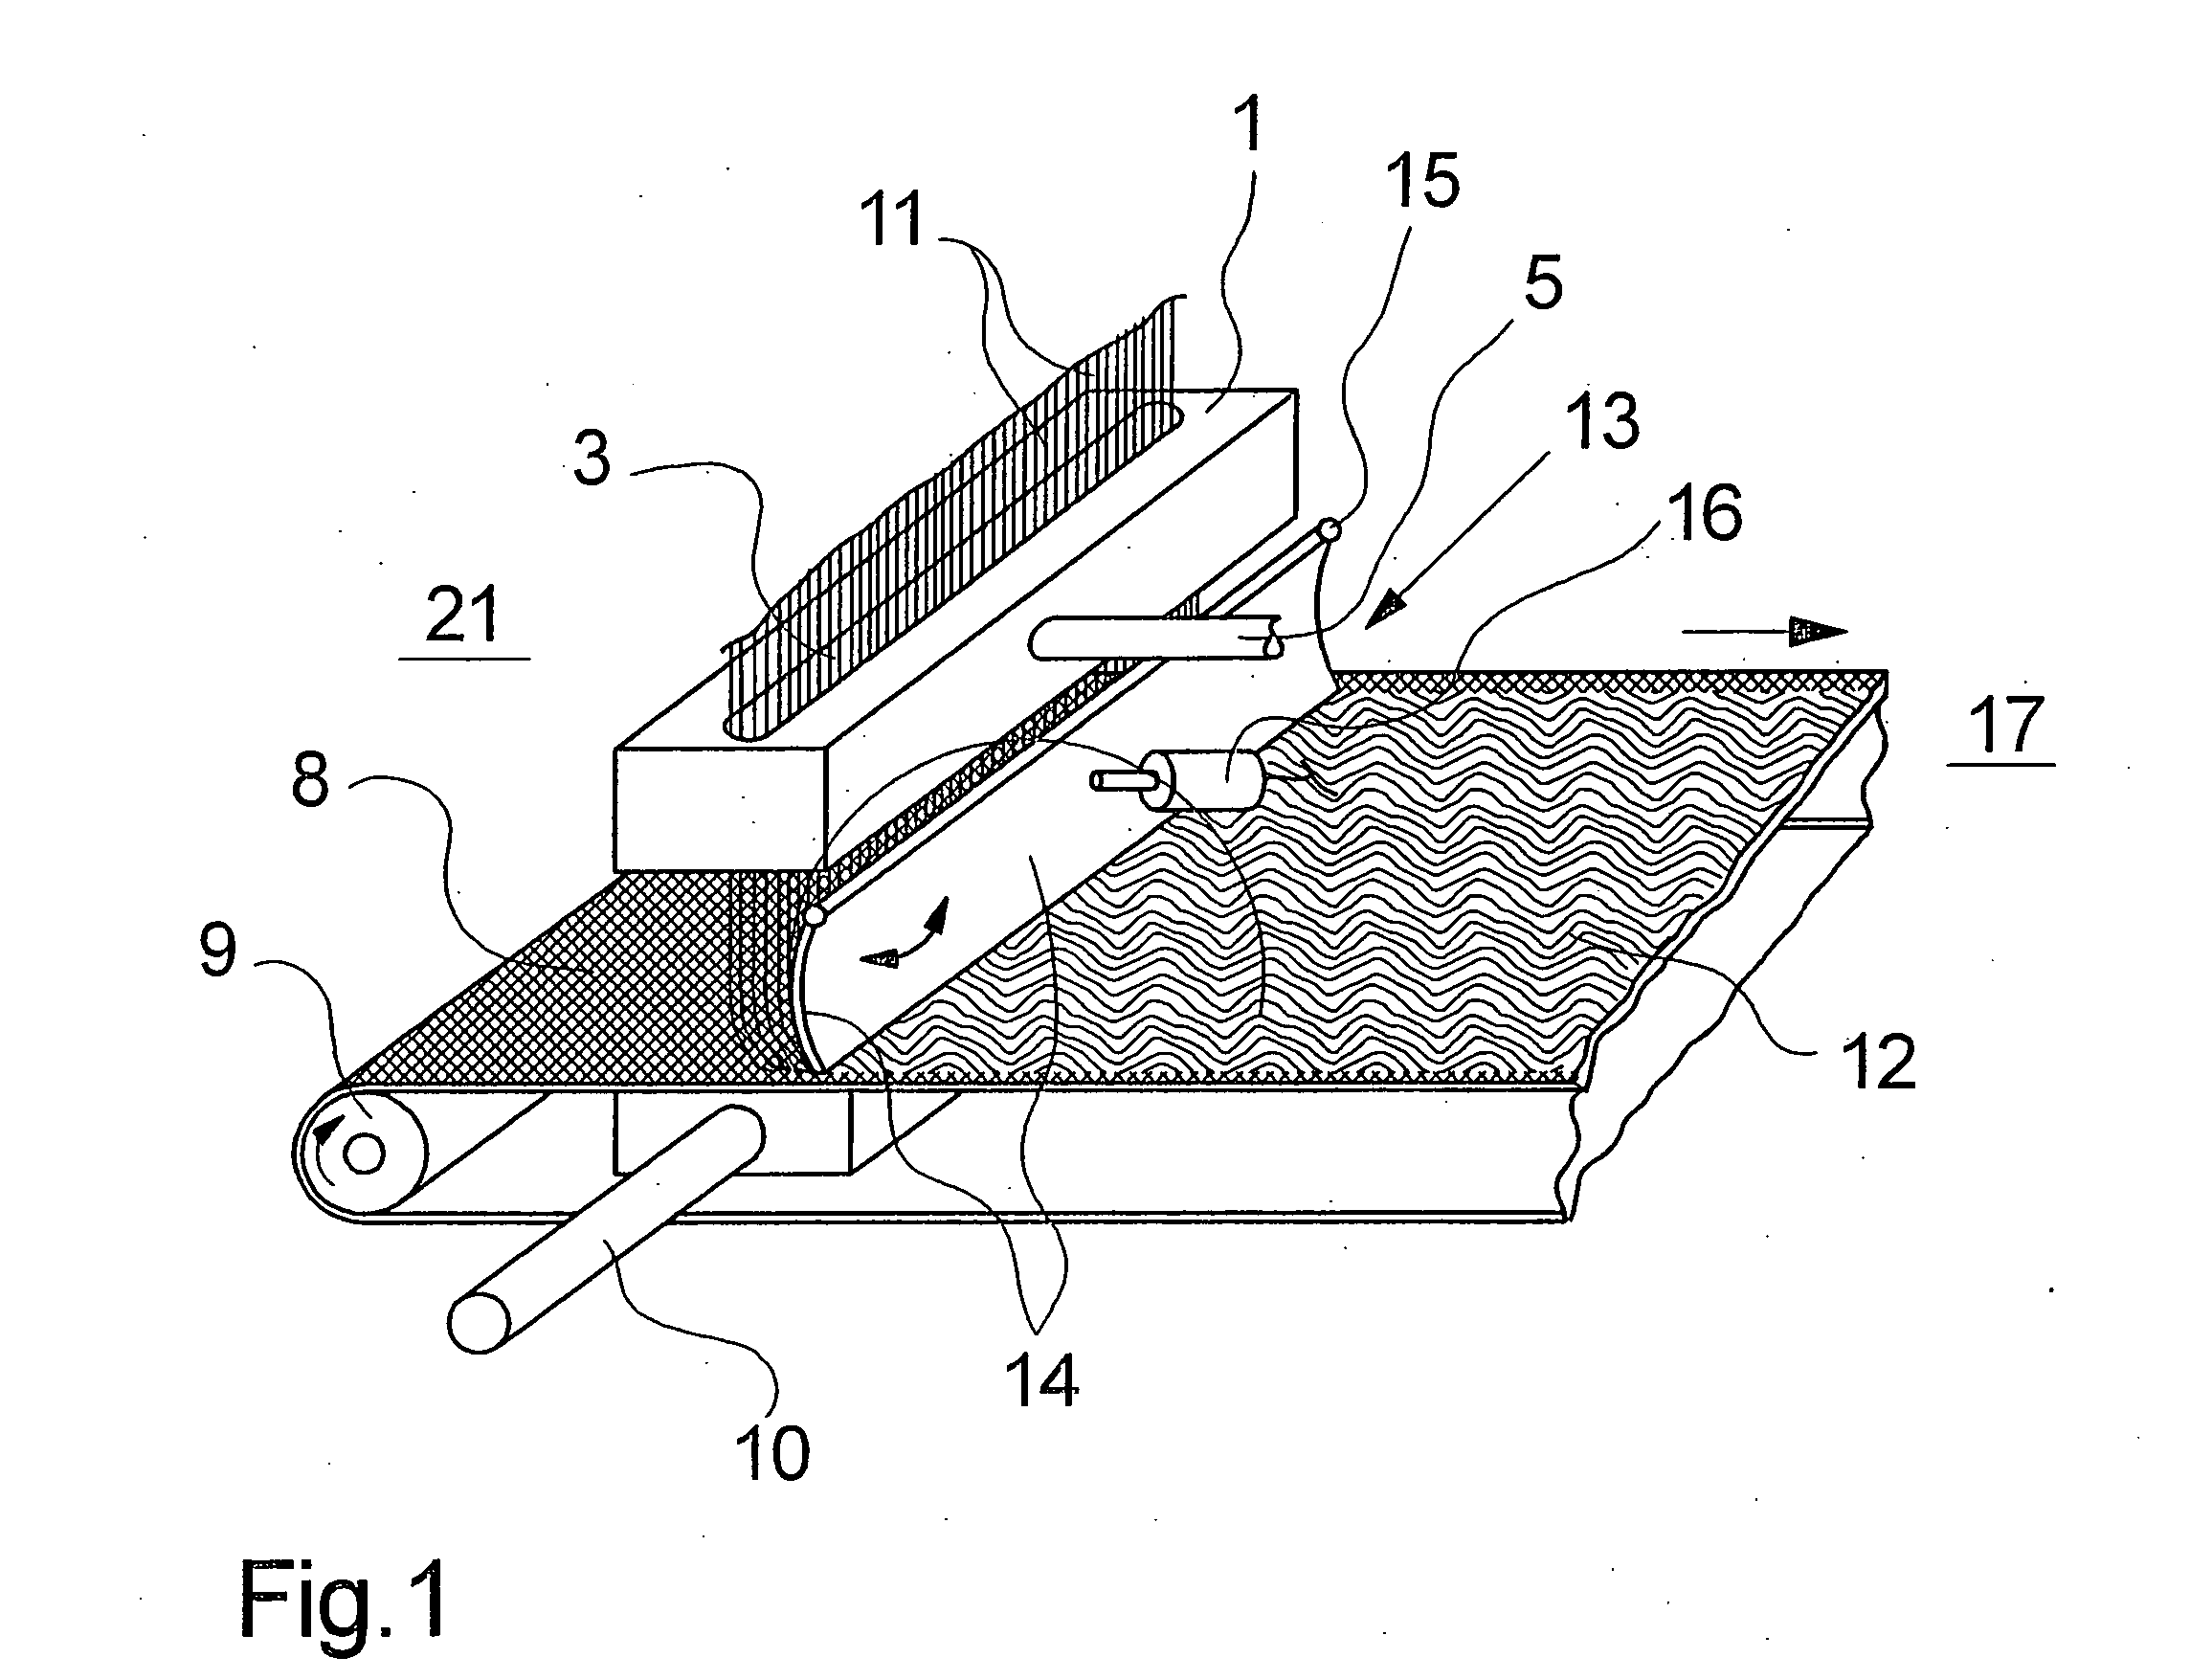 Method and apparatus for forming a non-woven web by deposition of synthetic filaments